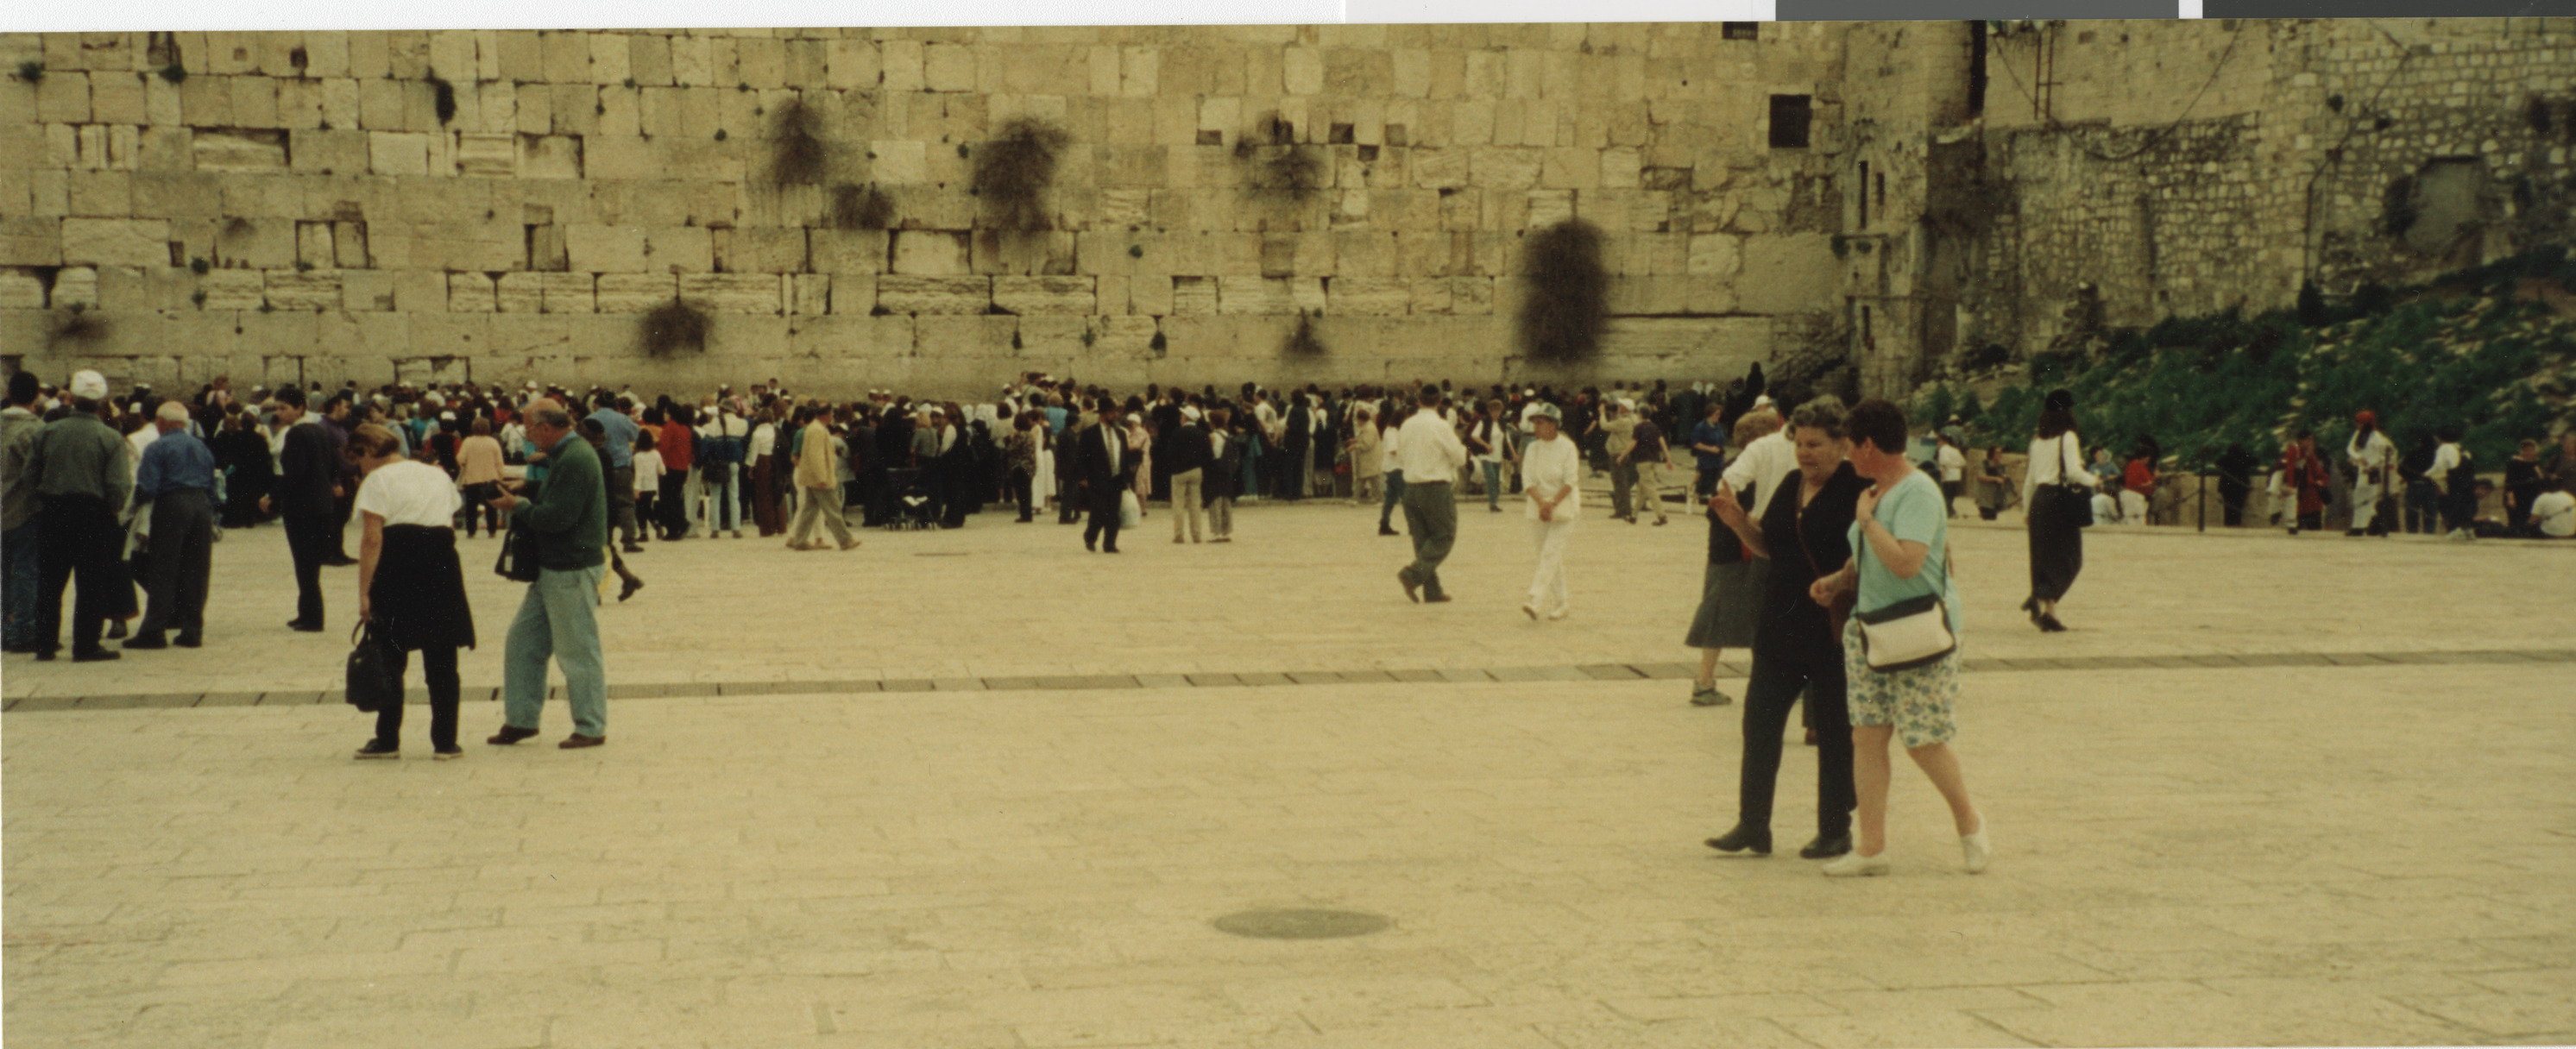 Photograph of mission trip to Israel, 1999-2003